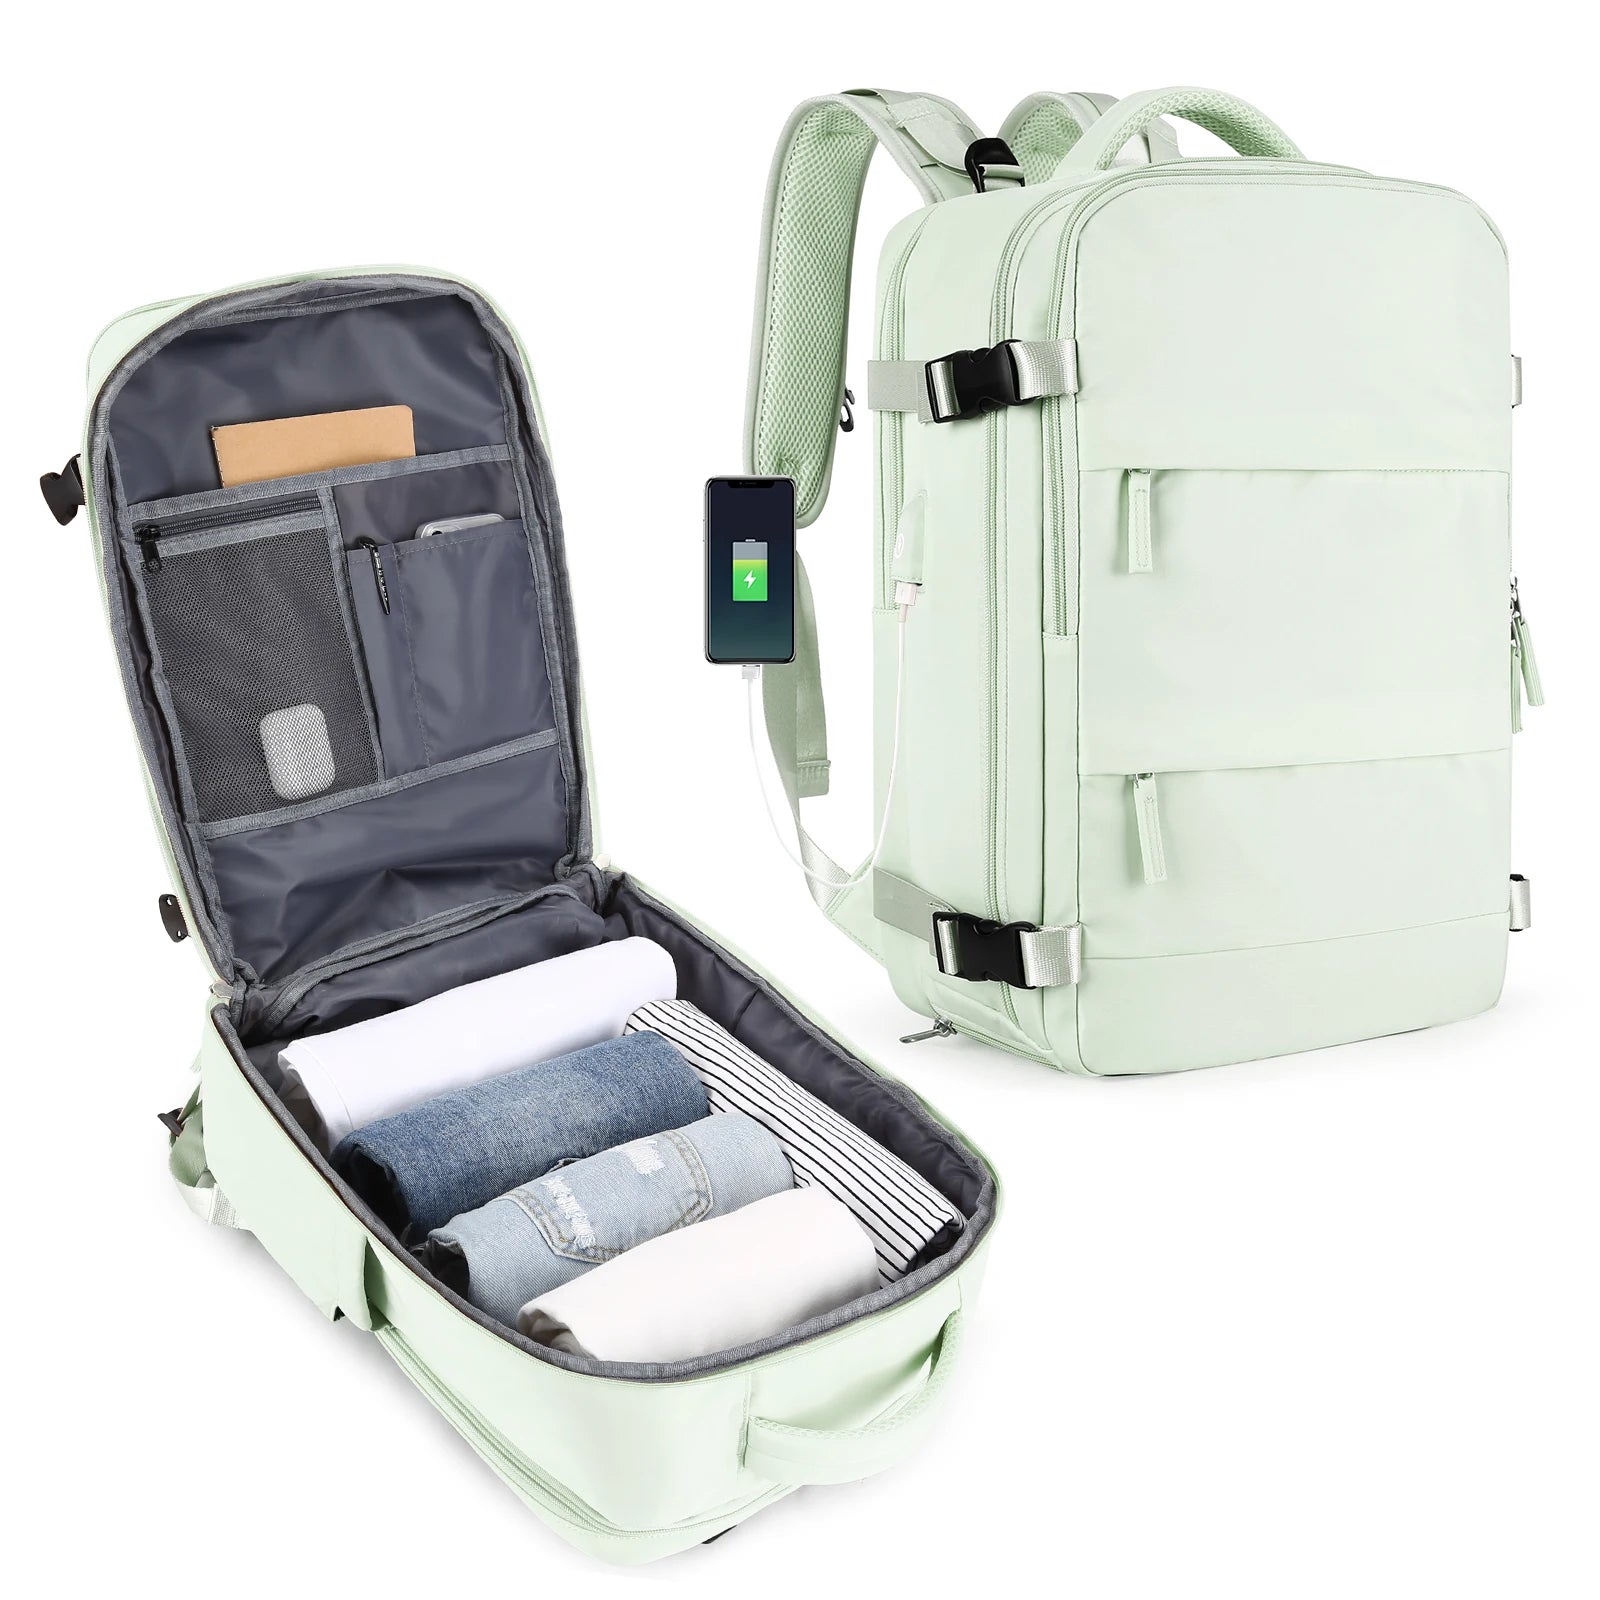 Mint green travel backpack personal item with wet dry pocket laptop sleeve usb charger and shoe sleeve